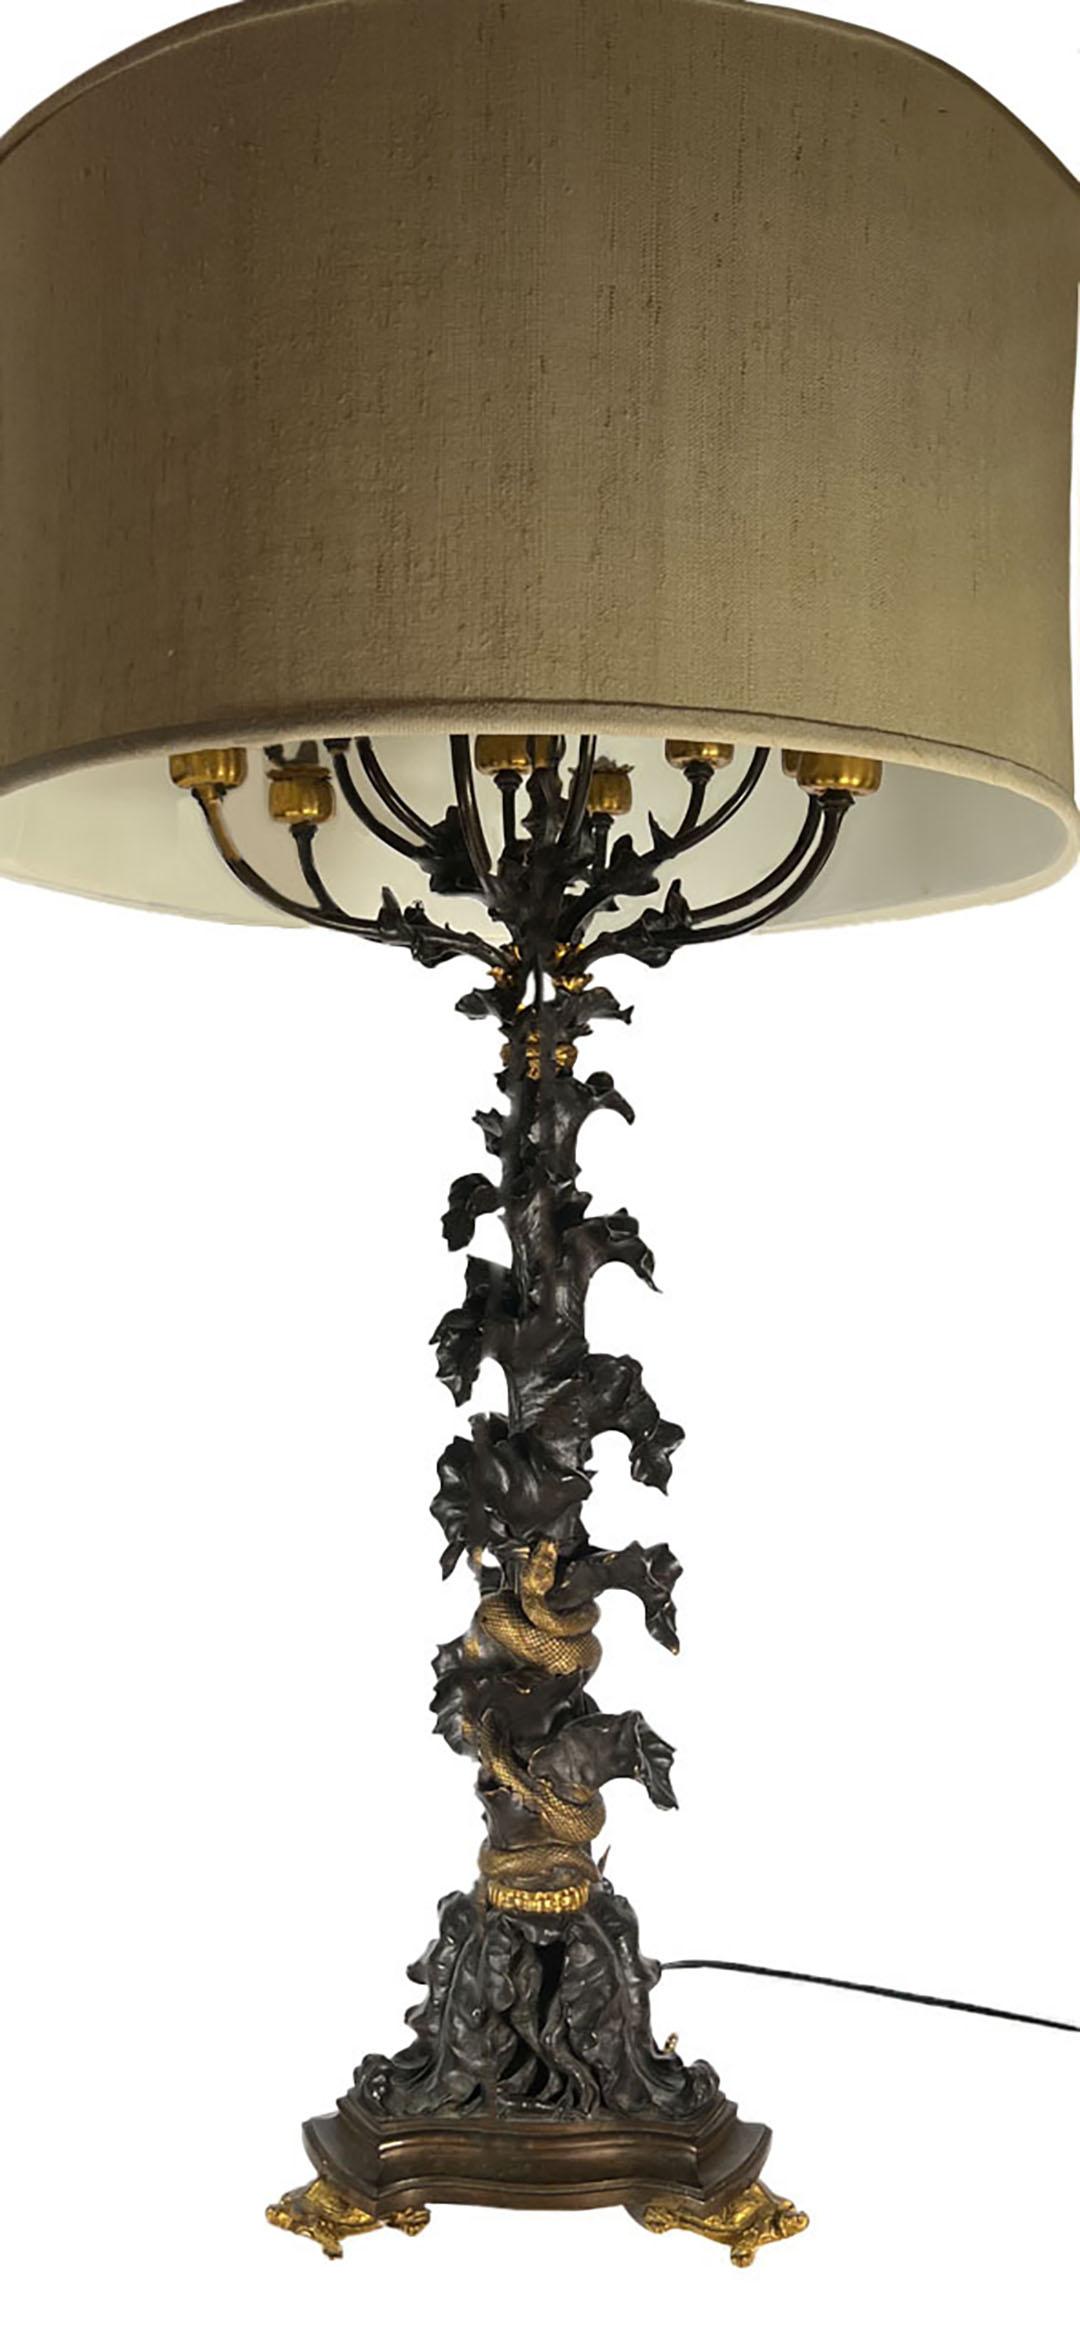 Pair of lamps attributed to EF Caldwell, New York City. Many of Caldwell designs and productions had turtles attached to the tripartite base. Gilded Eagle finials attached to the shades. Circa 1900.

The diameter of the lampshade is 21 1/2 inches.